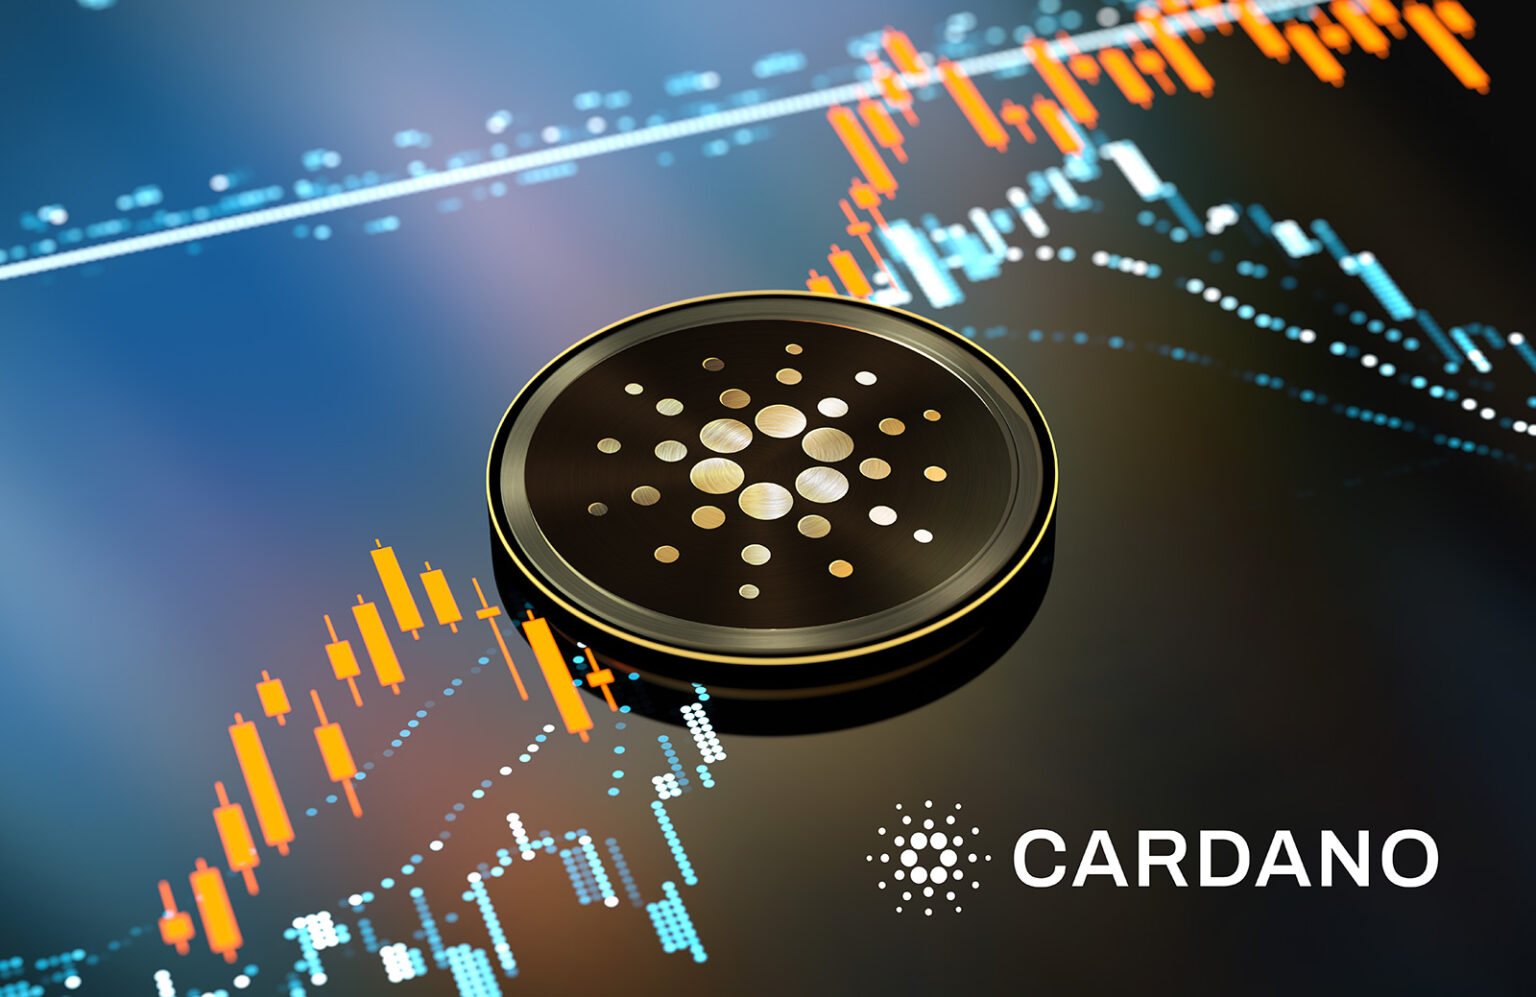 Cardano Surpasses 500 Million ADA In TVL - How About Its Impact On Price?